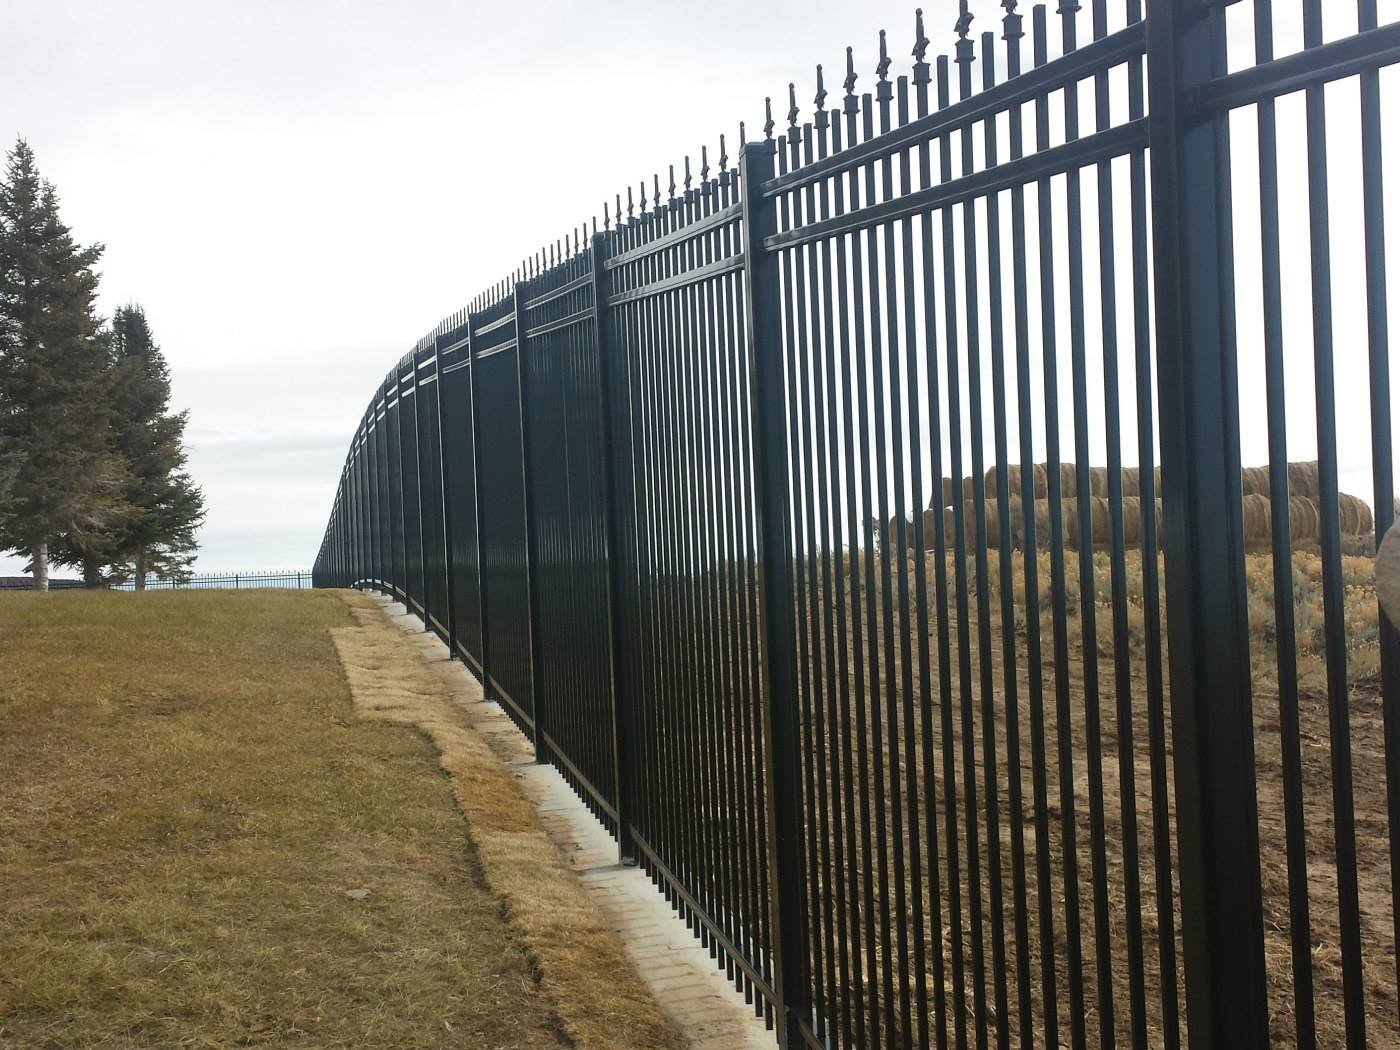 Wyoming Aluminum Residential Fence Project